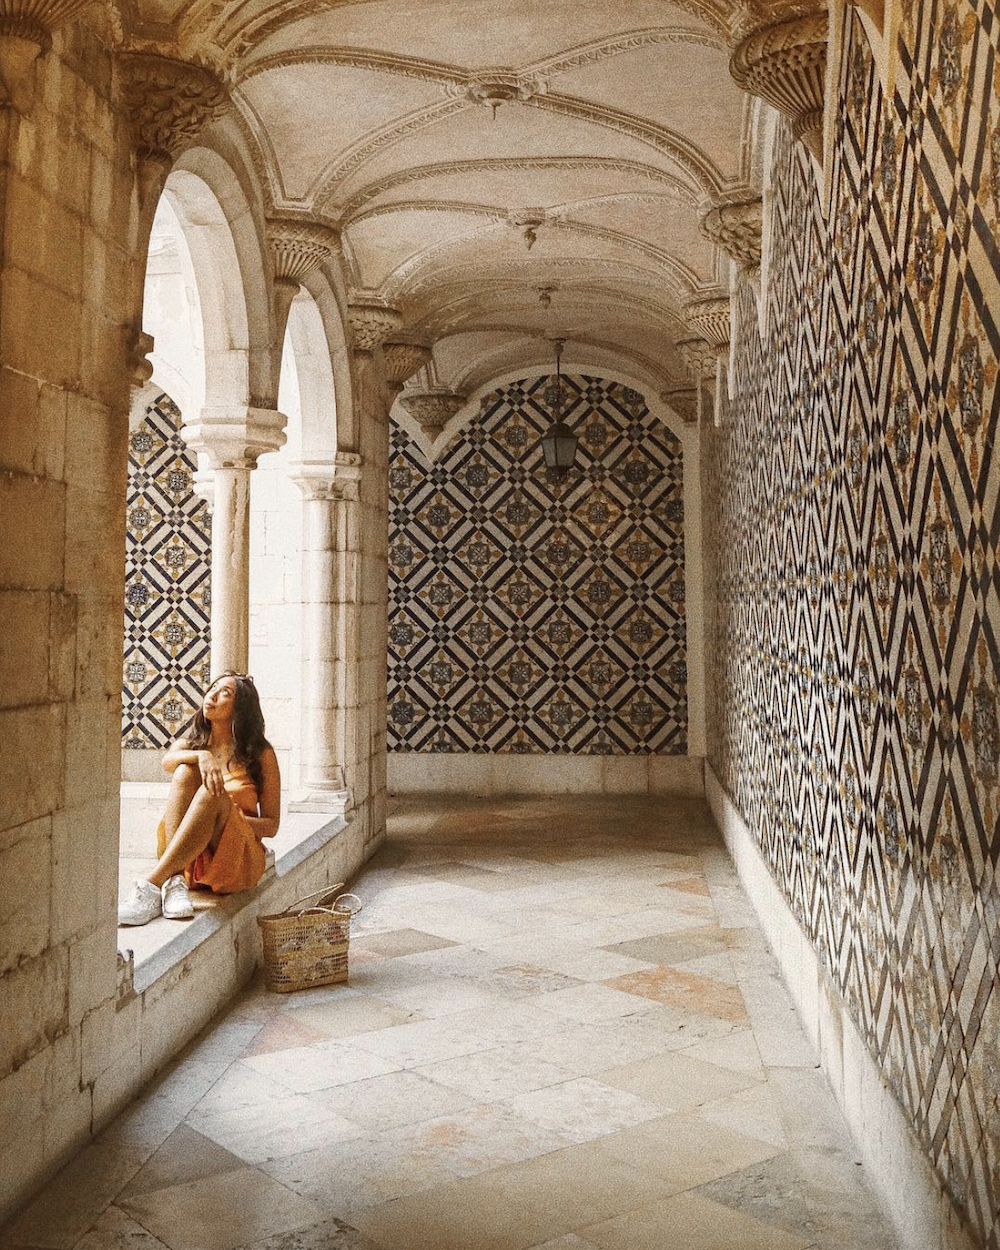 brunette woman in gold-orange dress sits in a tiled courtyard of white arches and blue detail